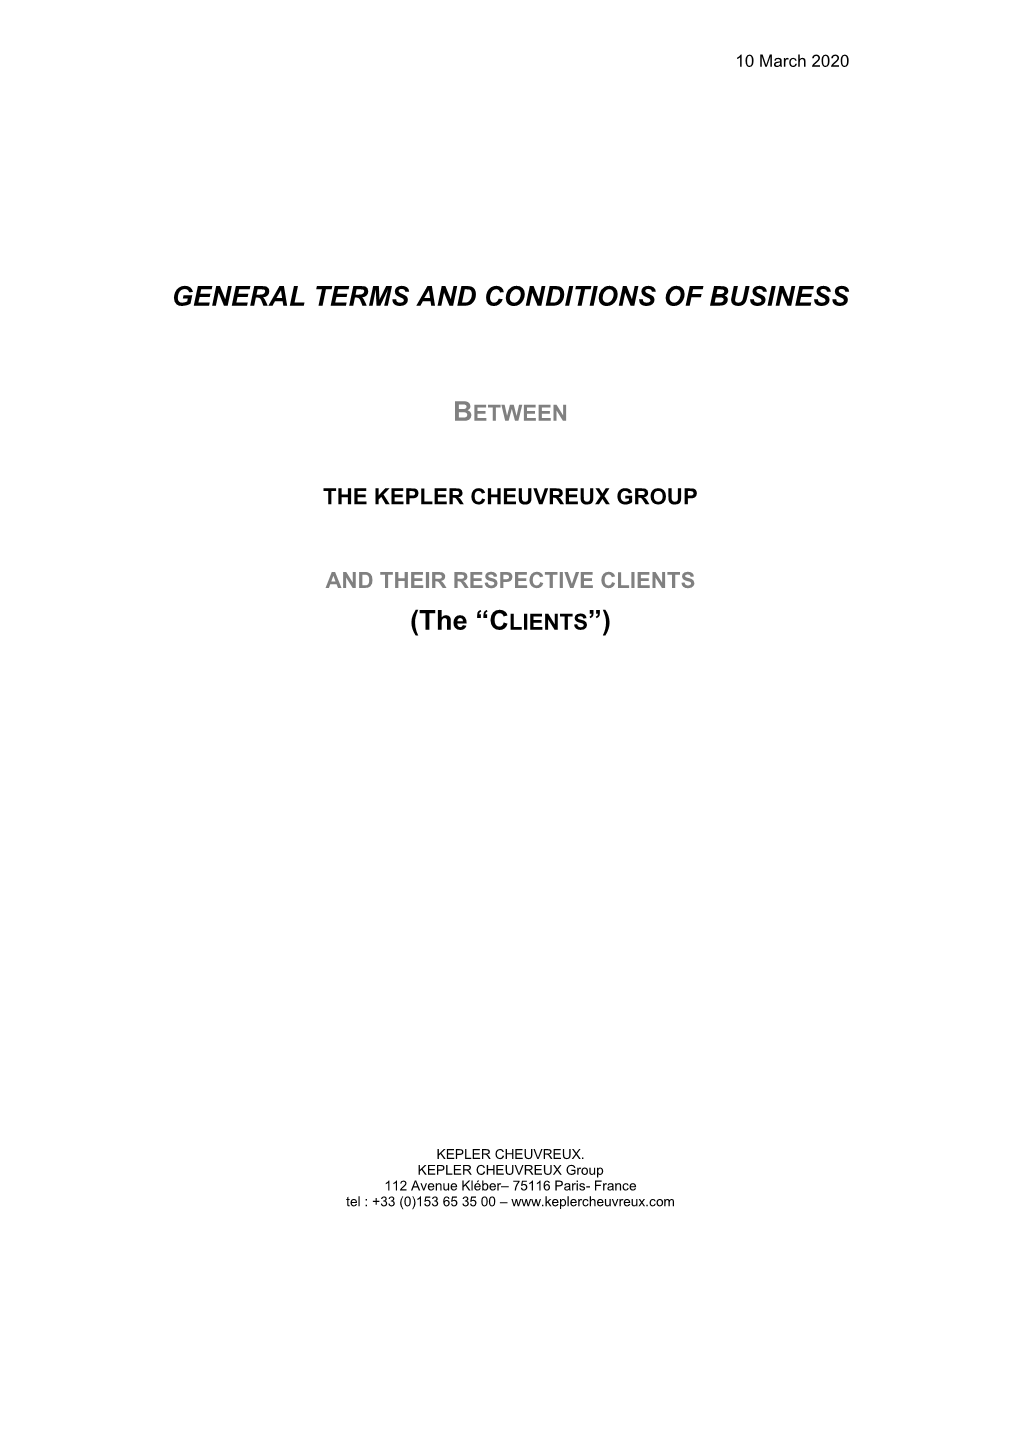 General Terms and Conditions of Business